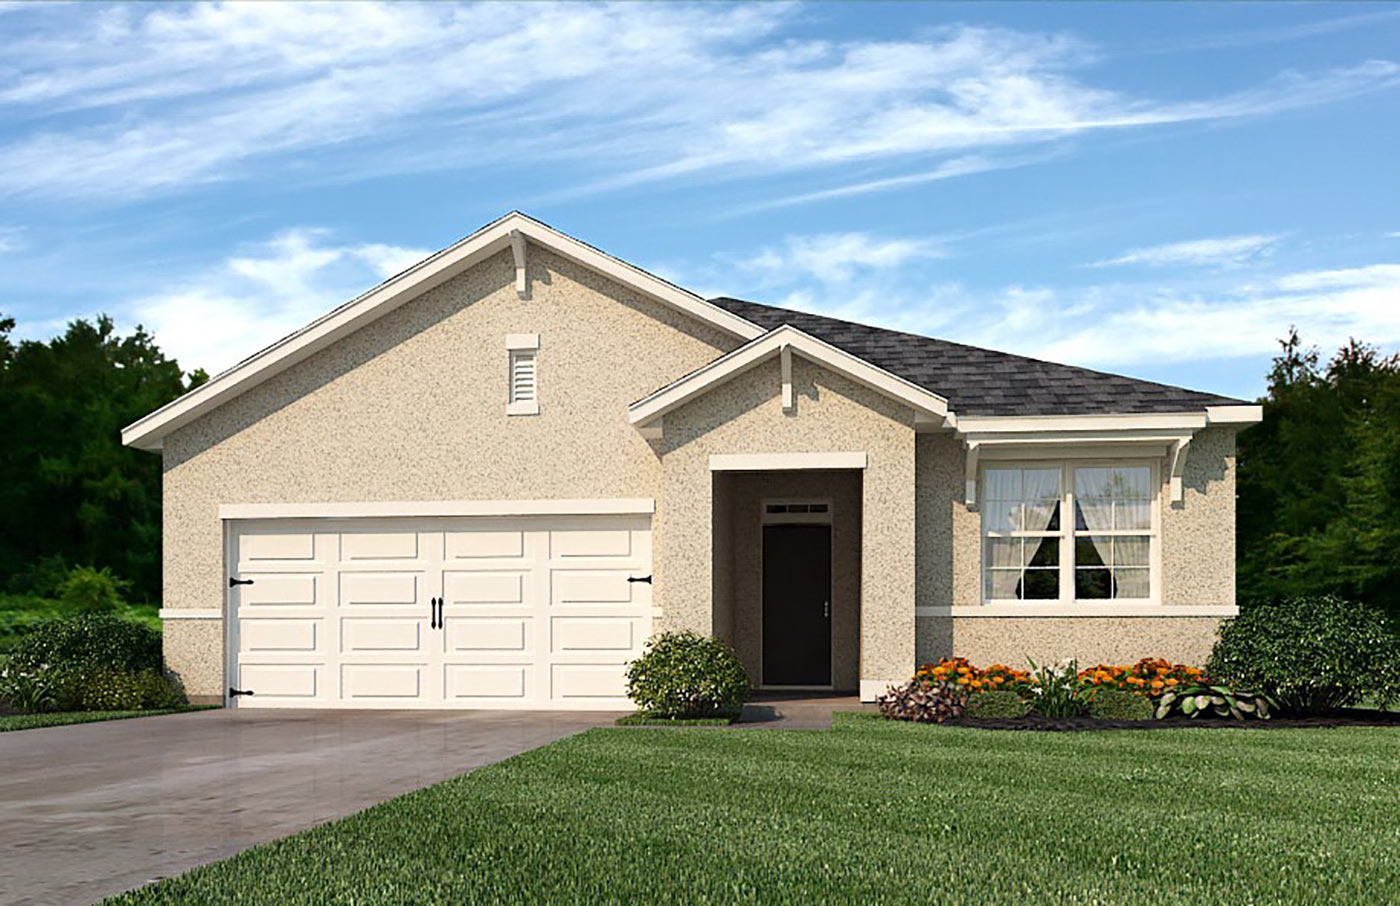 New Homes in North Port Homes | North Port, FL | Express Series